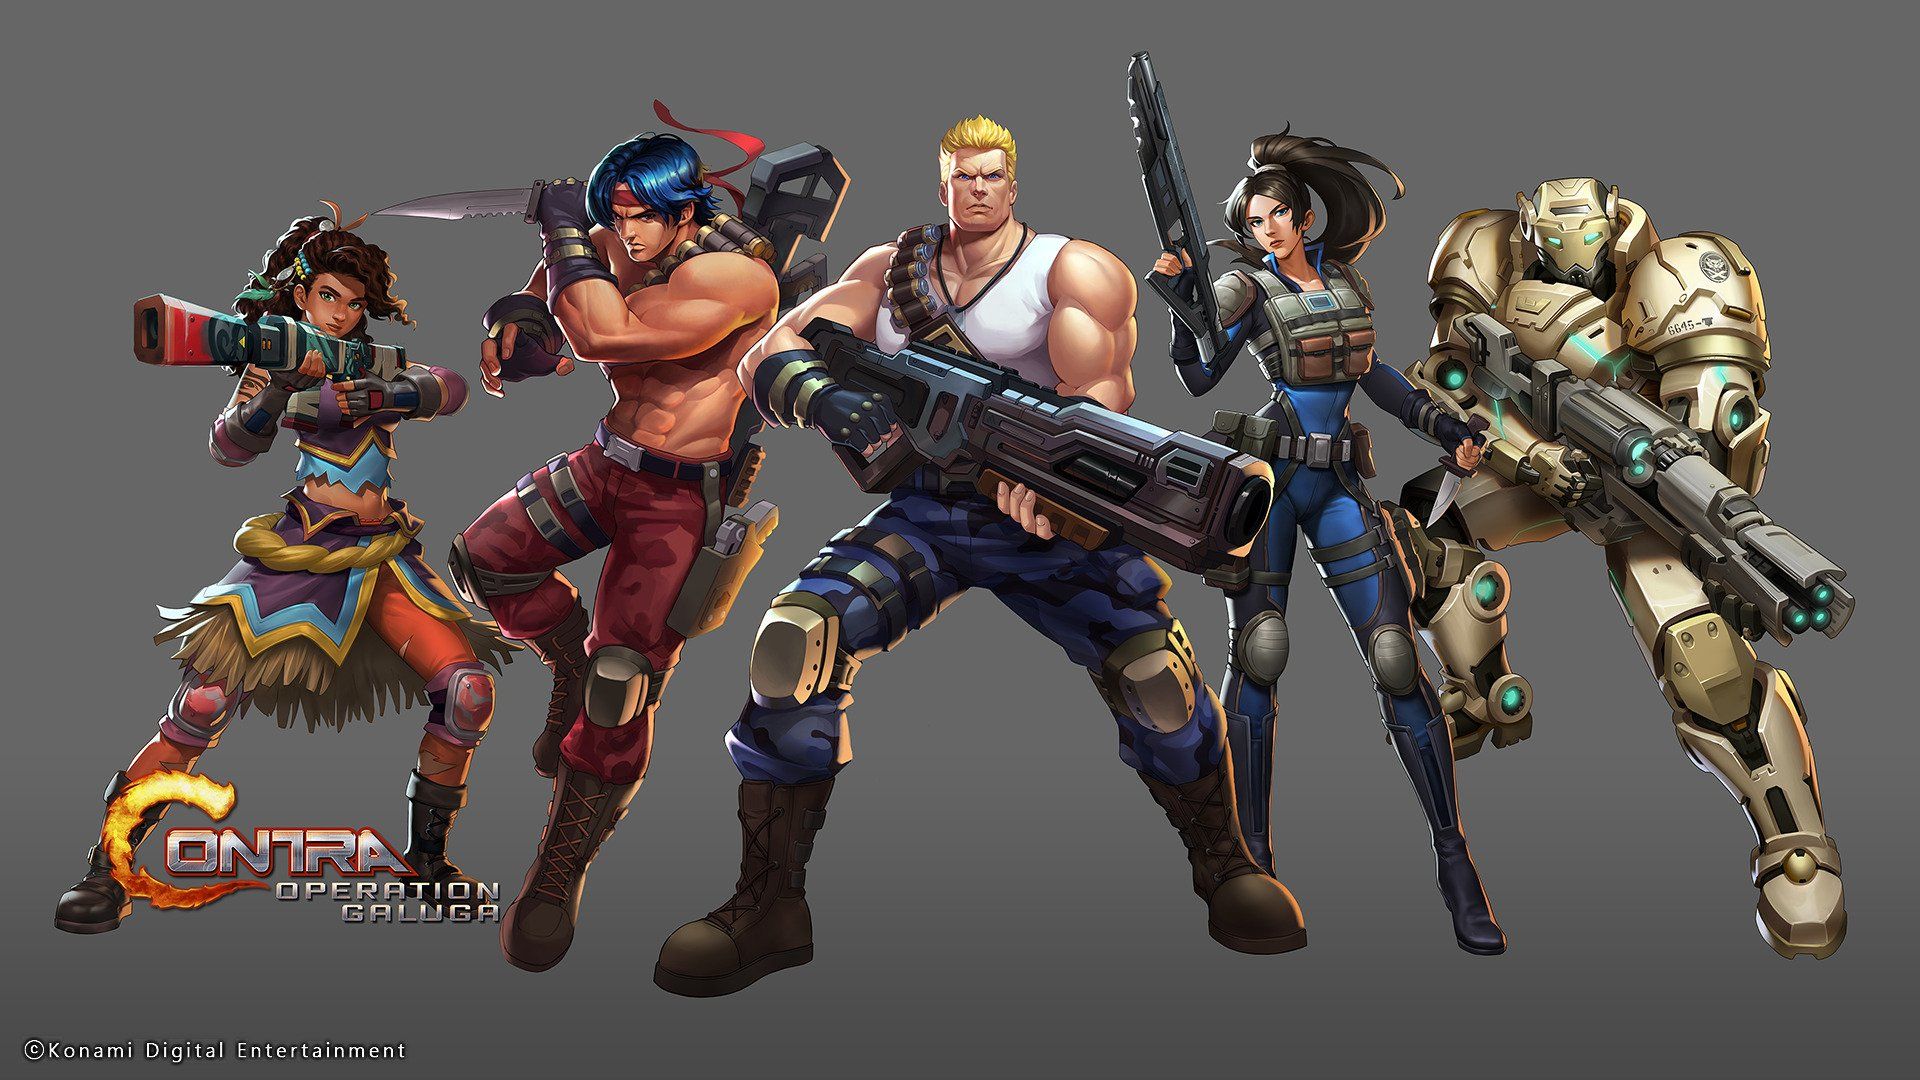 CONTRA: Operation Galuga characters